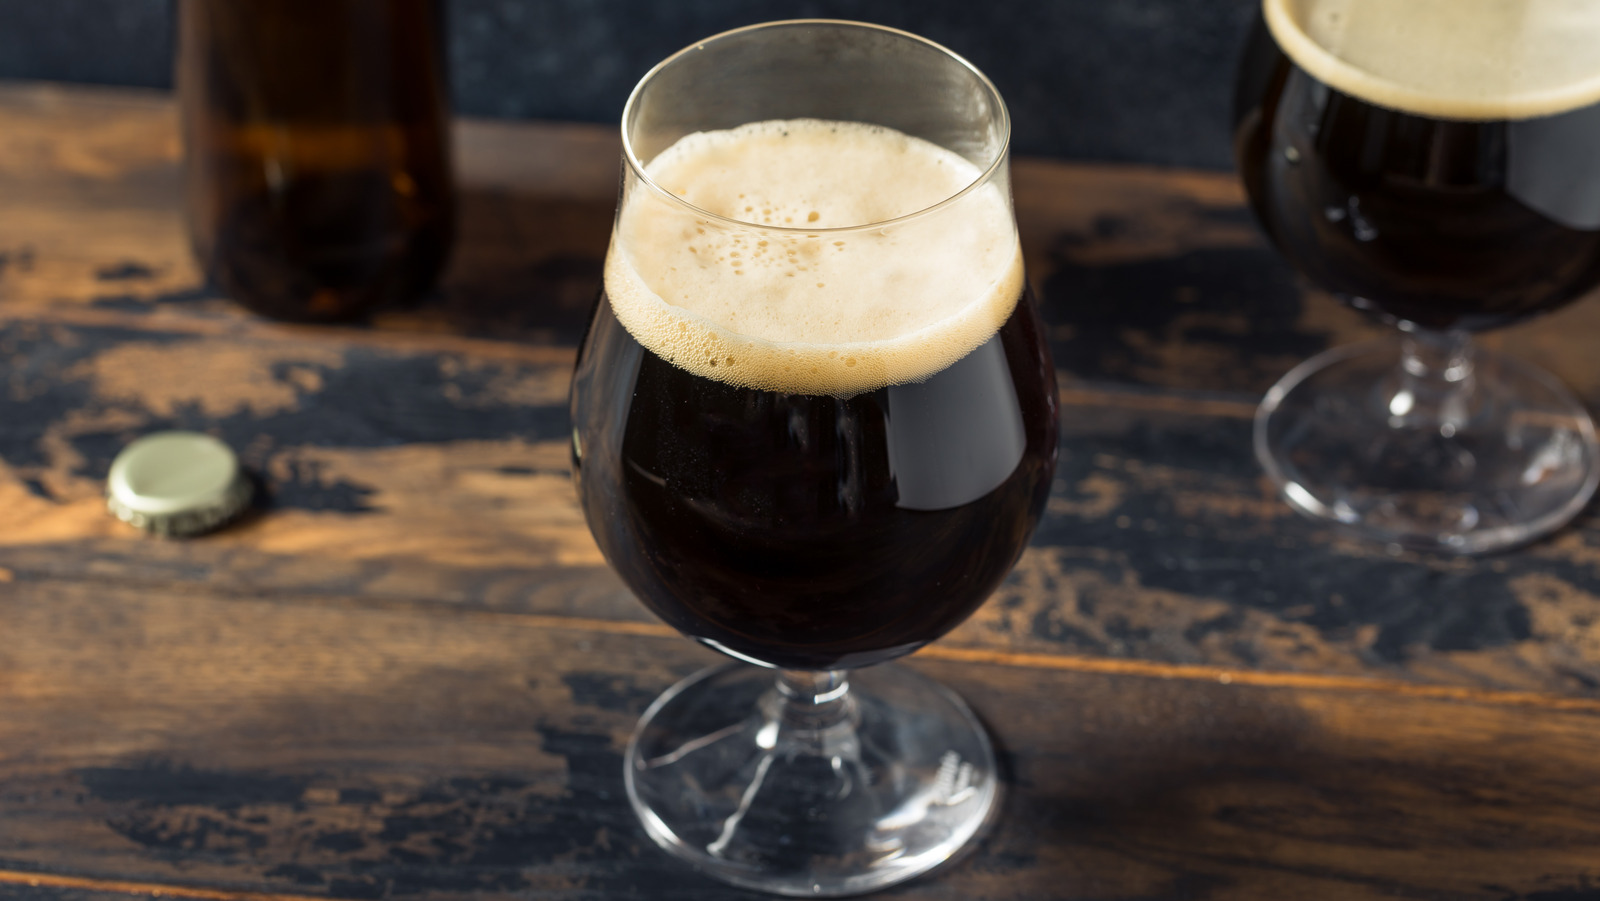 What Is Milk Stout And Does It Contain Dairy?